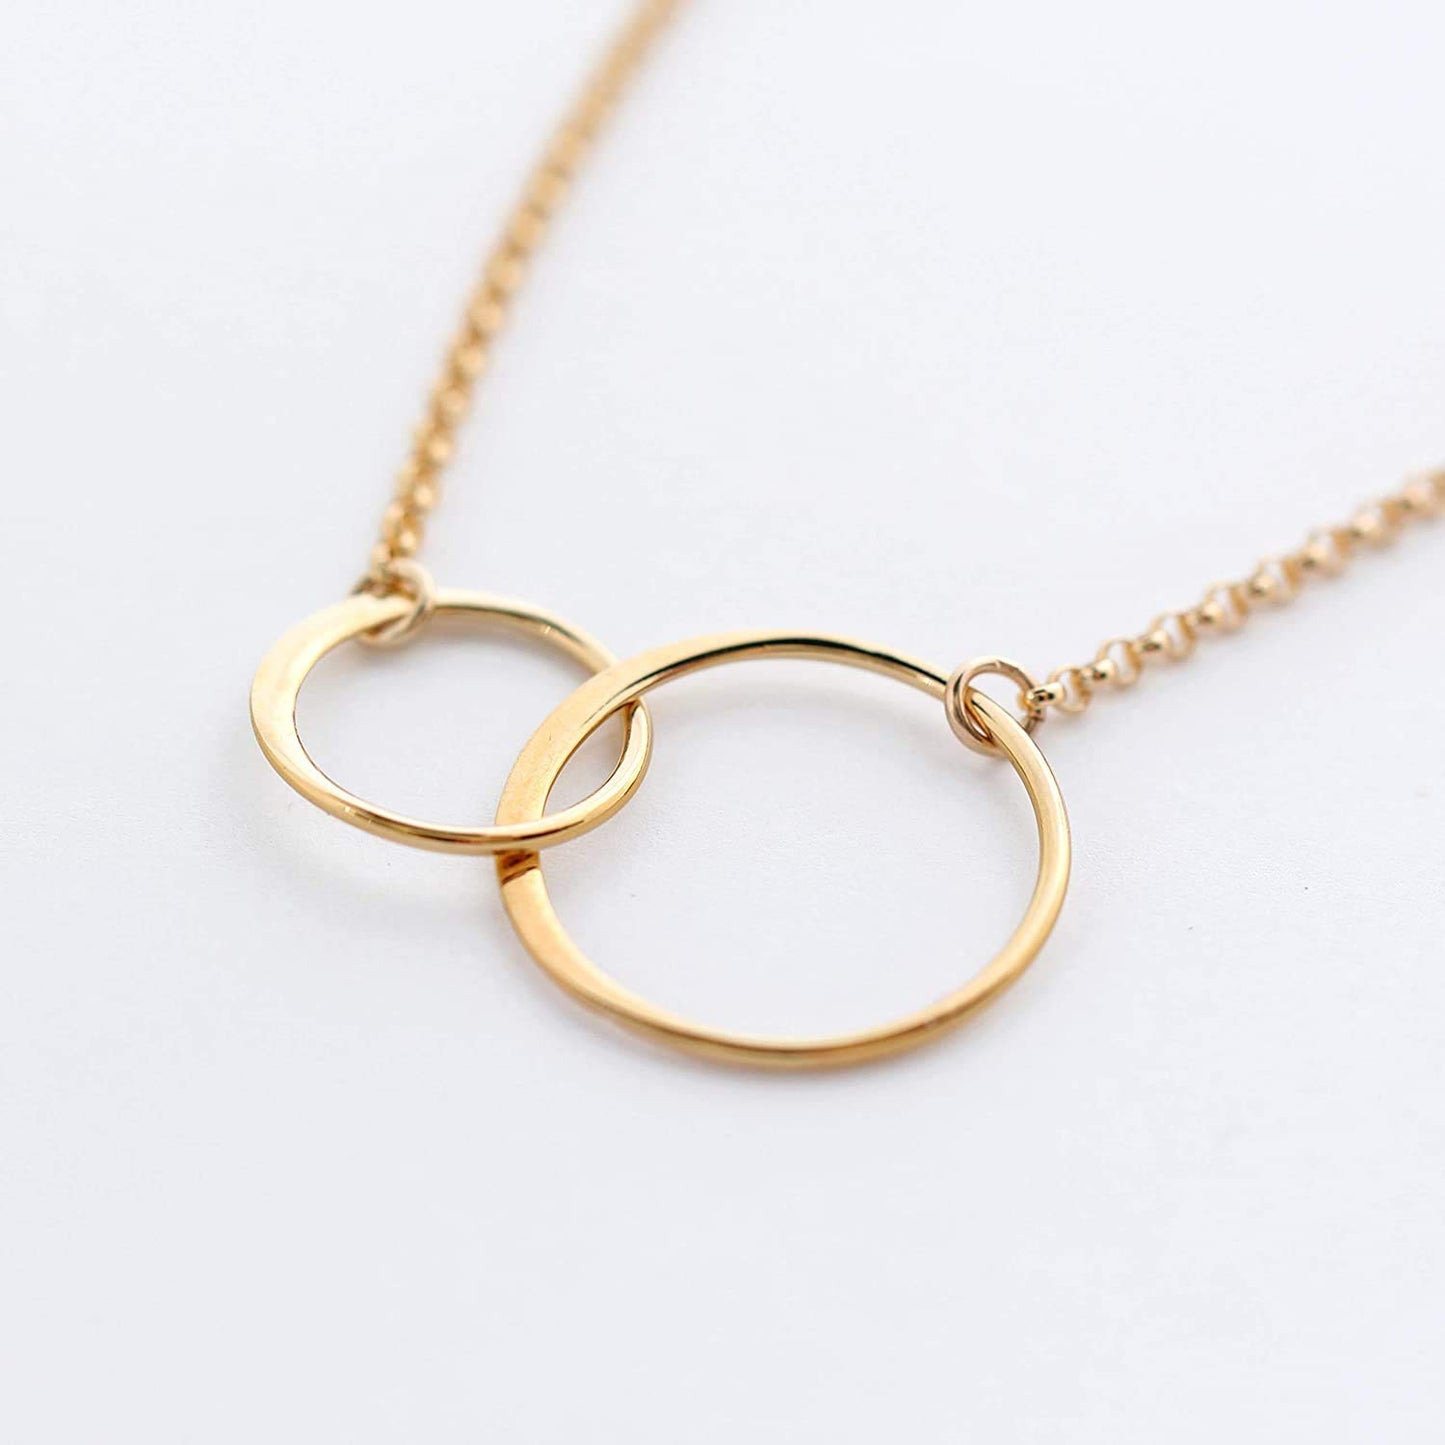 Bonus Sister Necklace • Two Connected Circles • 14k Gold Fill ï Sister in law • Bride or Groom Sister • Adopted • Stepsister Best Friend • Friendship Love Gift • Appreciation Gratitude Jewelry